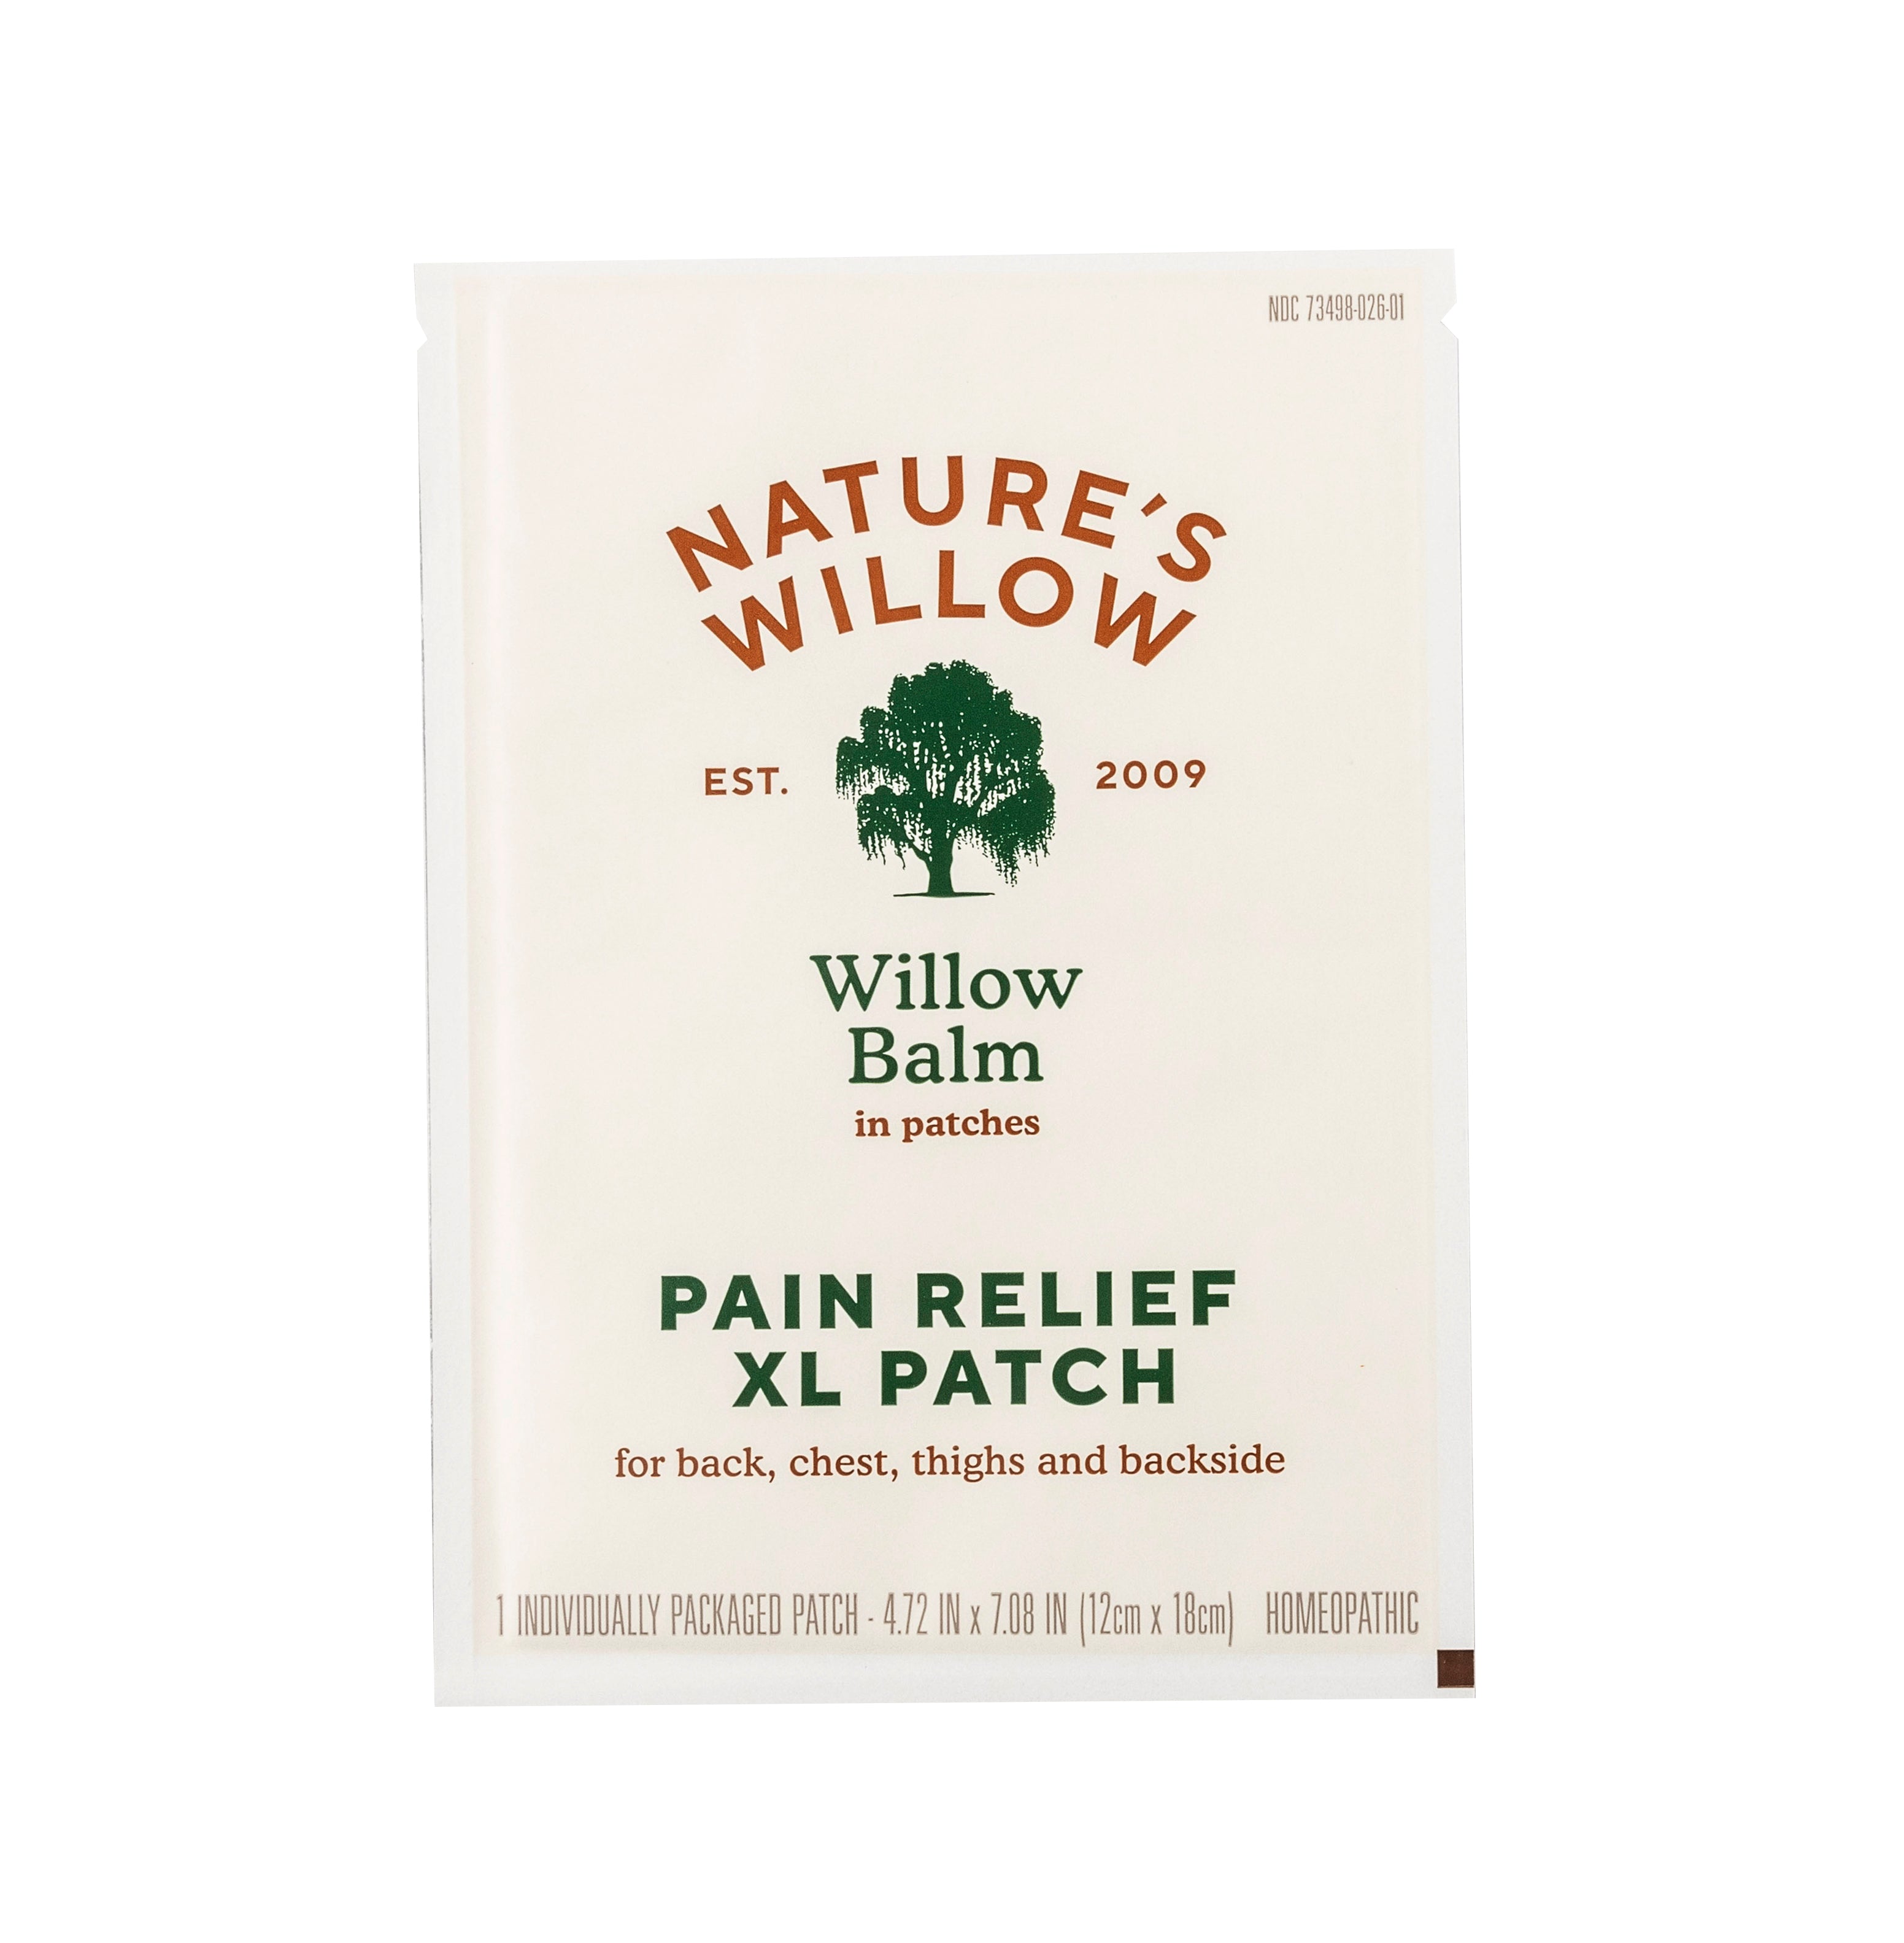 Pain Relieving Patch XL